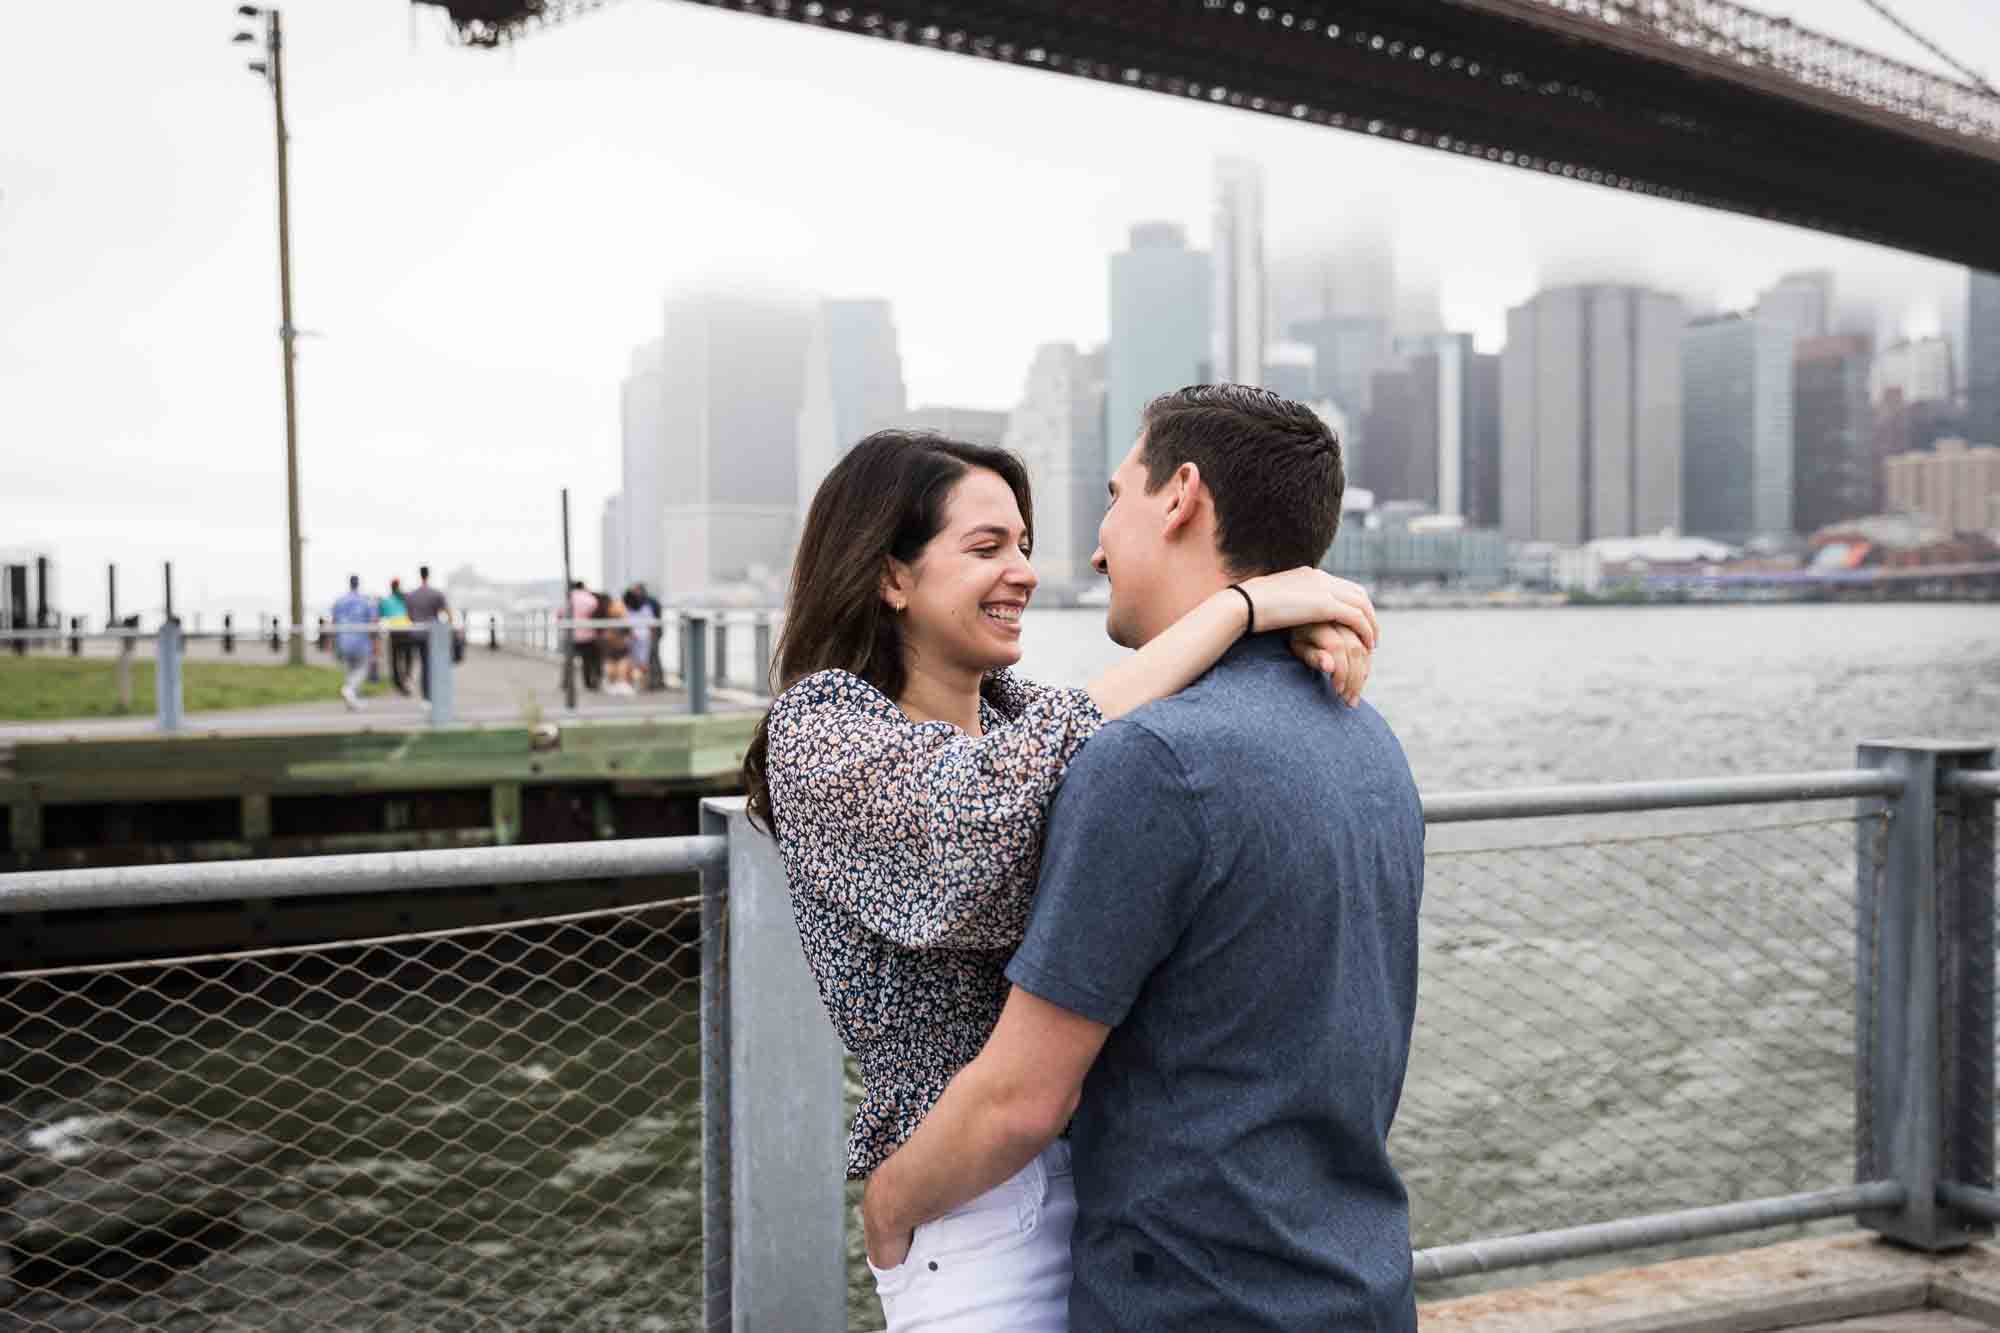 Couple hugging on waterfront with Brooklyn Bridge in background for an article on Brooklyn Bridge Park rainy day photo locations